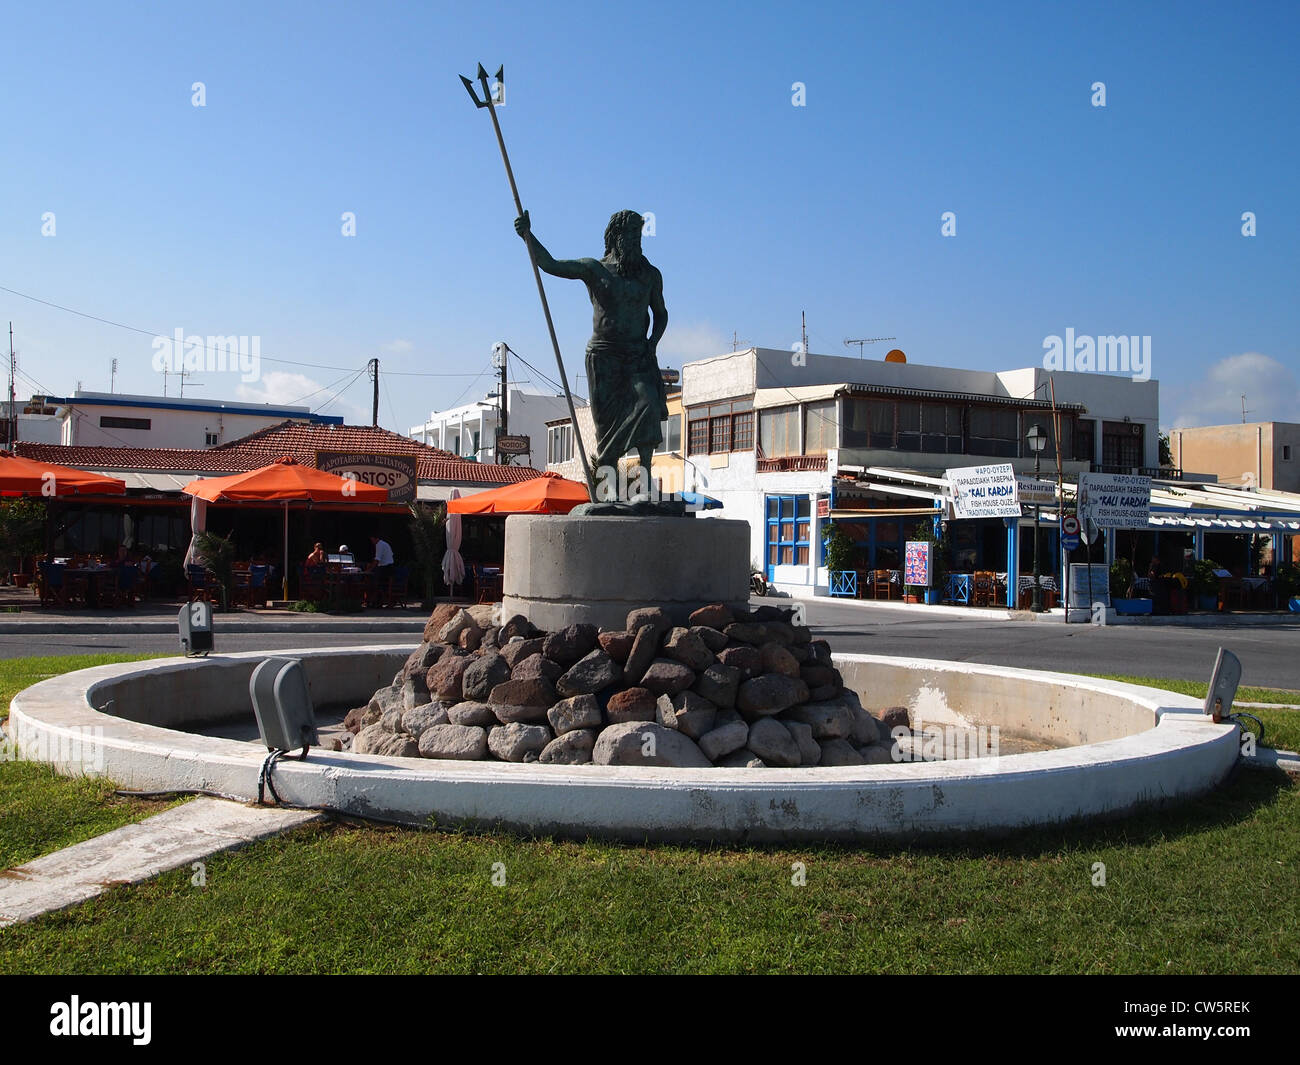 A statue in a crossing Stock Photo